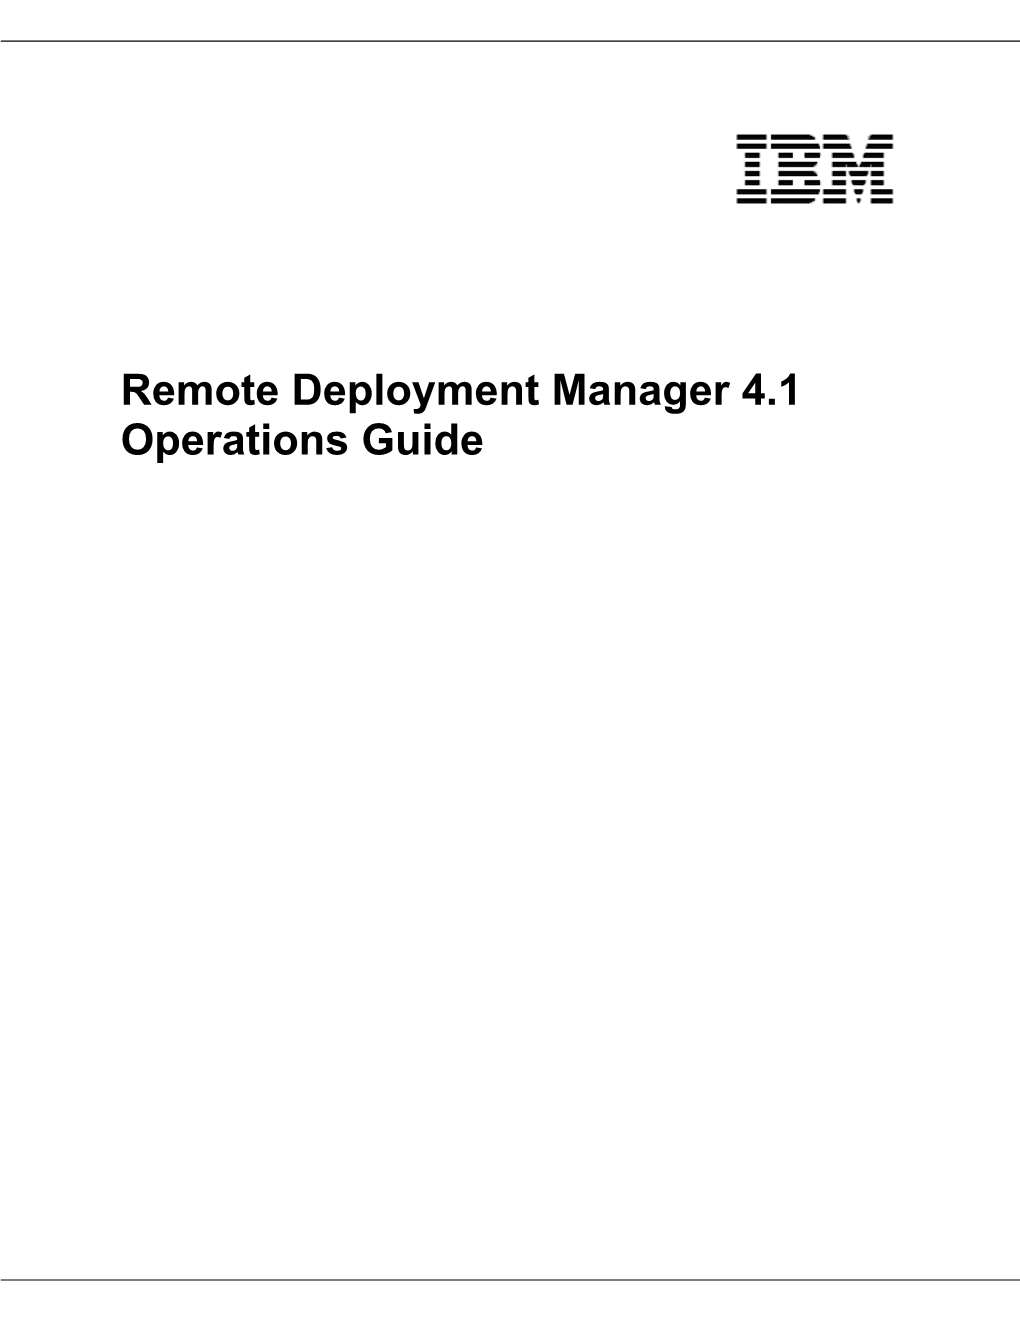 Remote Deployment Manager 4.1 Operations Guide